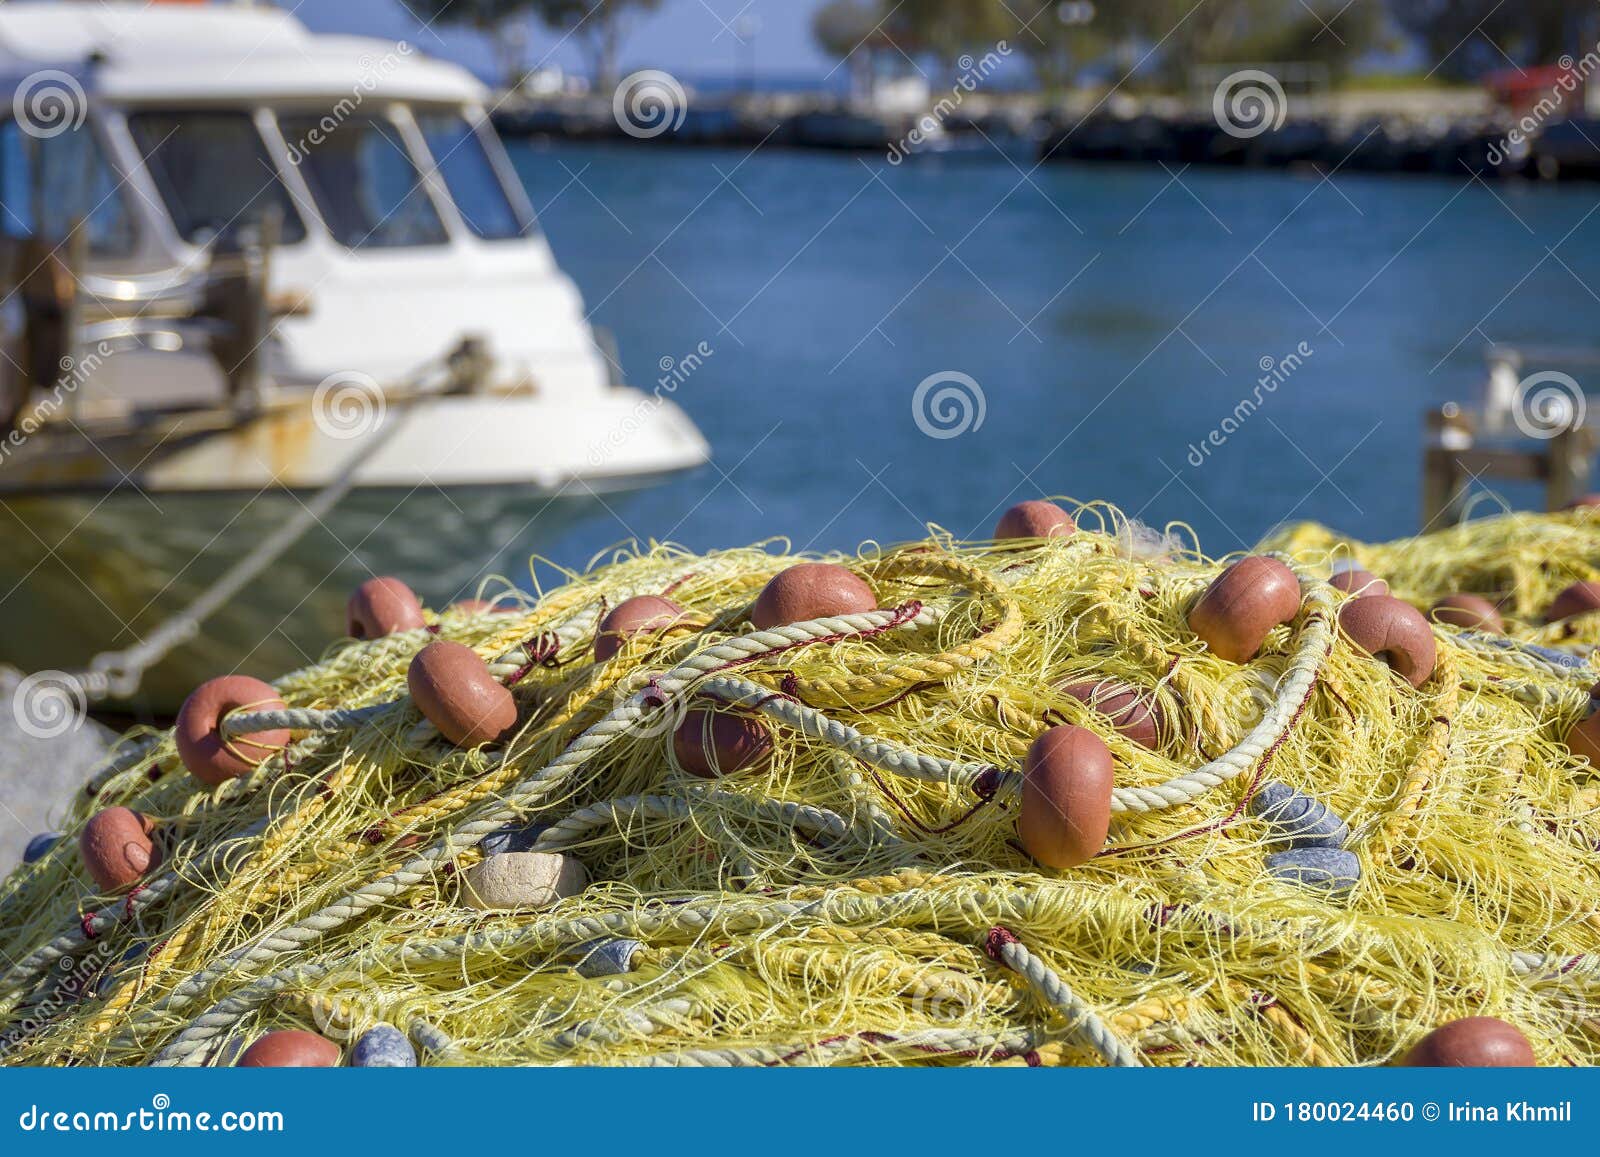 https://thumbs.dreamstime.com/z/empty-fishing-nets-pier-near-parked-small-boat-yellow-ropes-dock-white-fisherman-sailor-concept-180024460.jpg